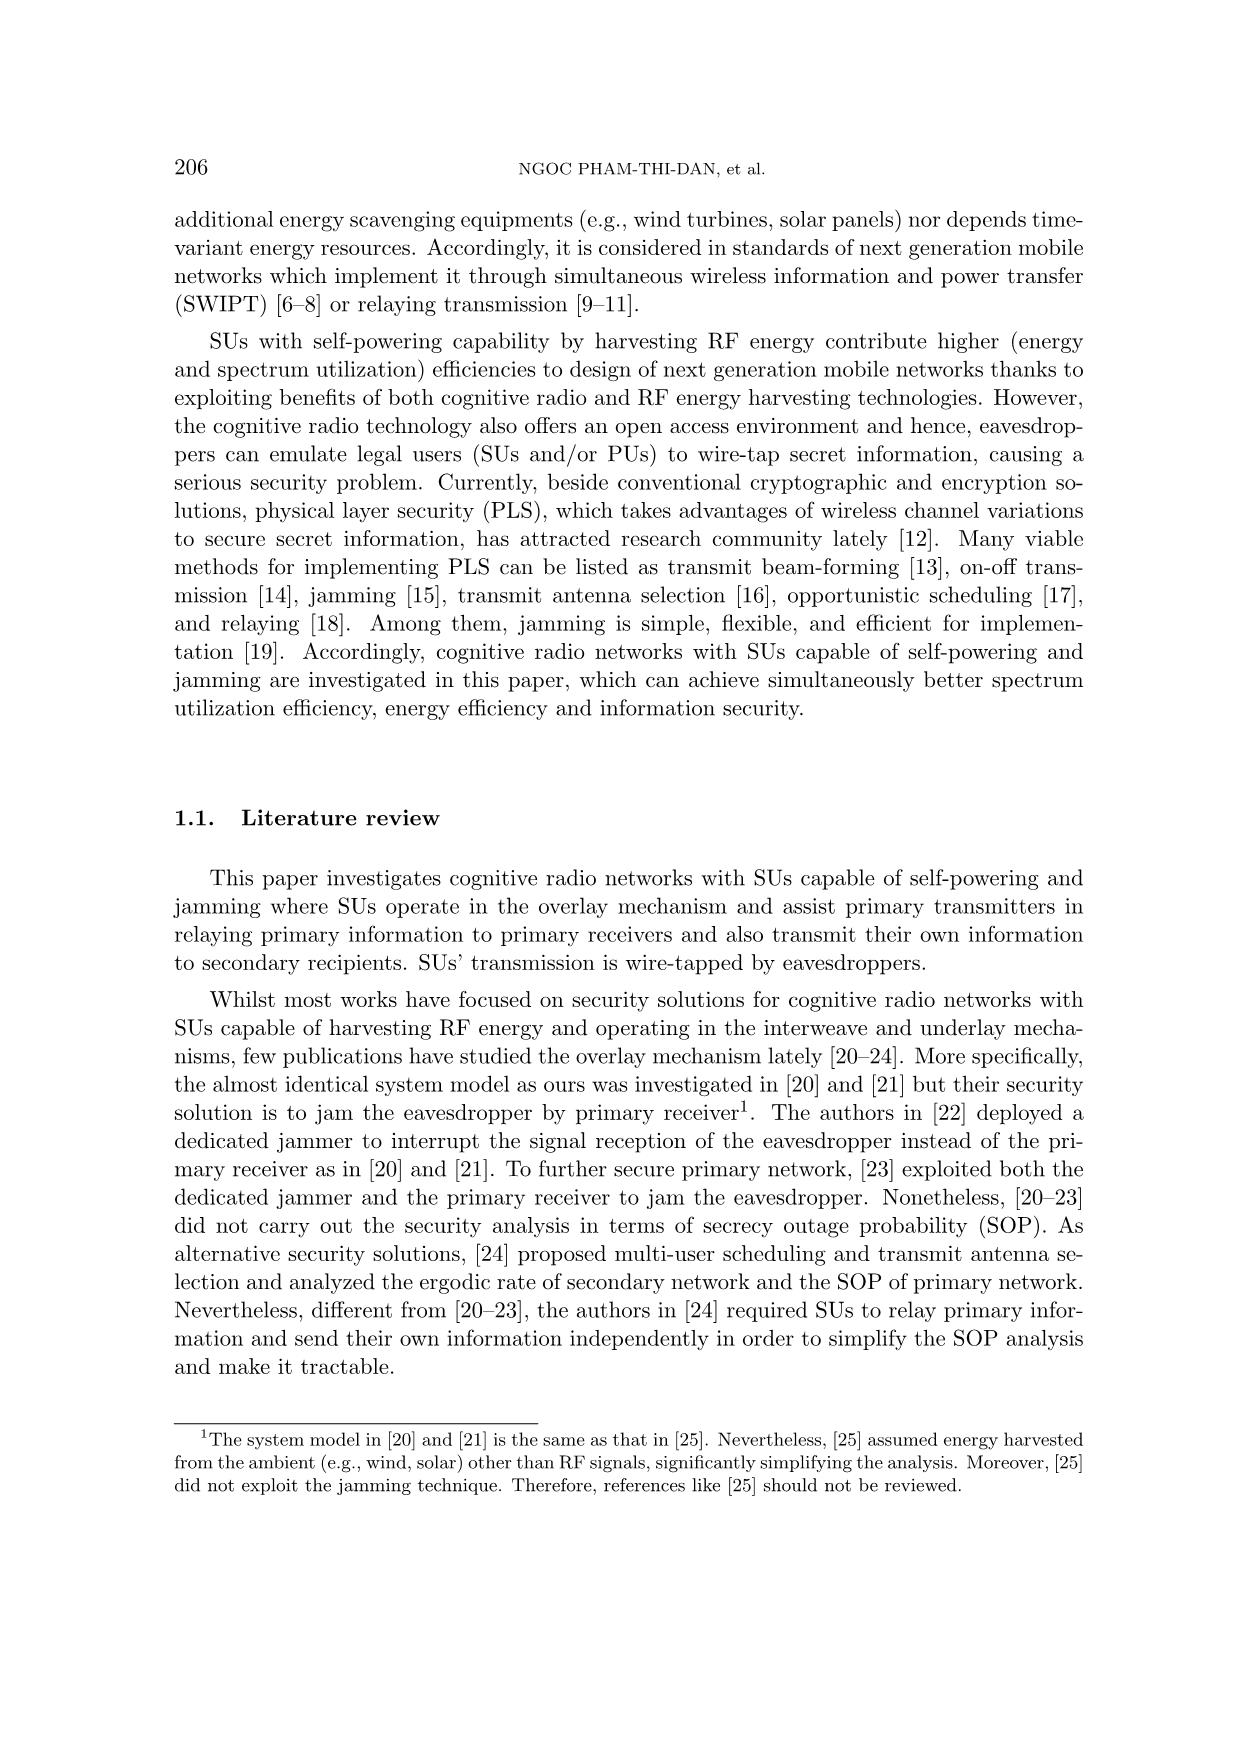 Security capability analysis of cognitive radio network with secondary user capable of jamming and self-powering trang 2